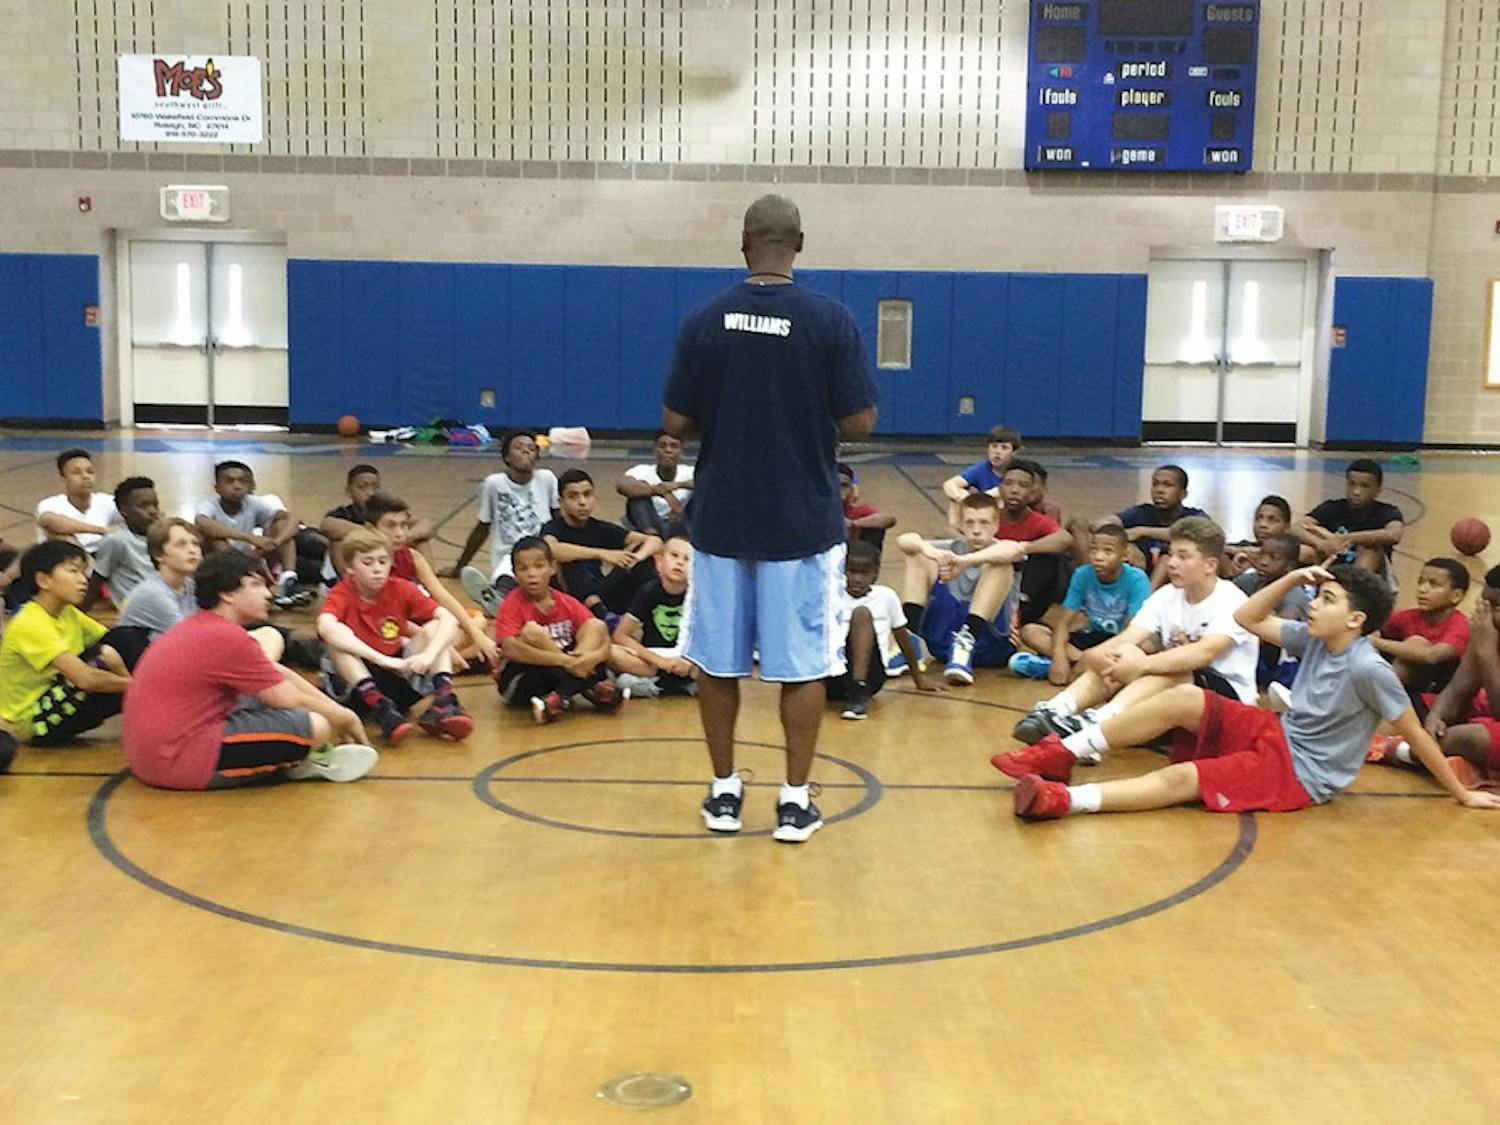 Donald Williams, a former NCAA National Championship winner, hosts a summer basketball camp for children in the community.